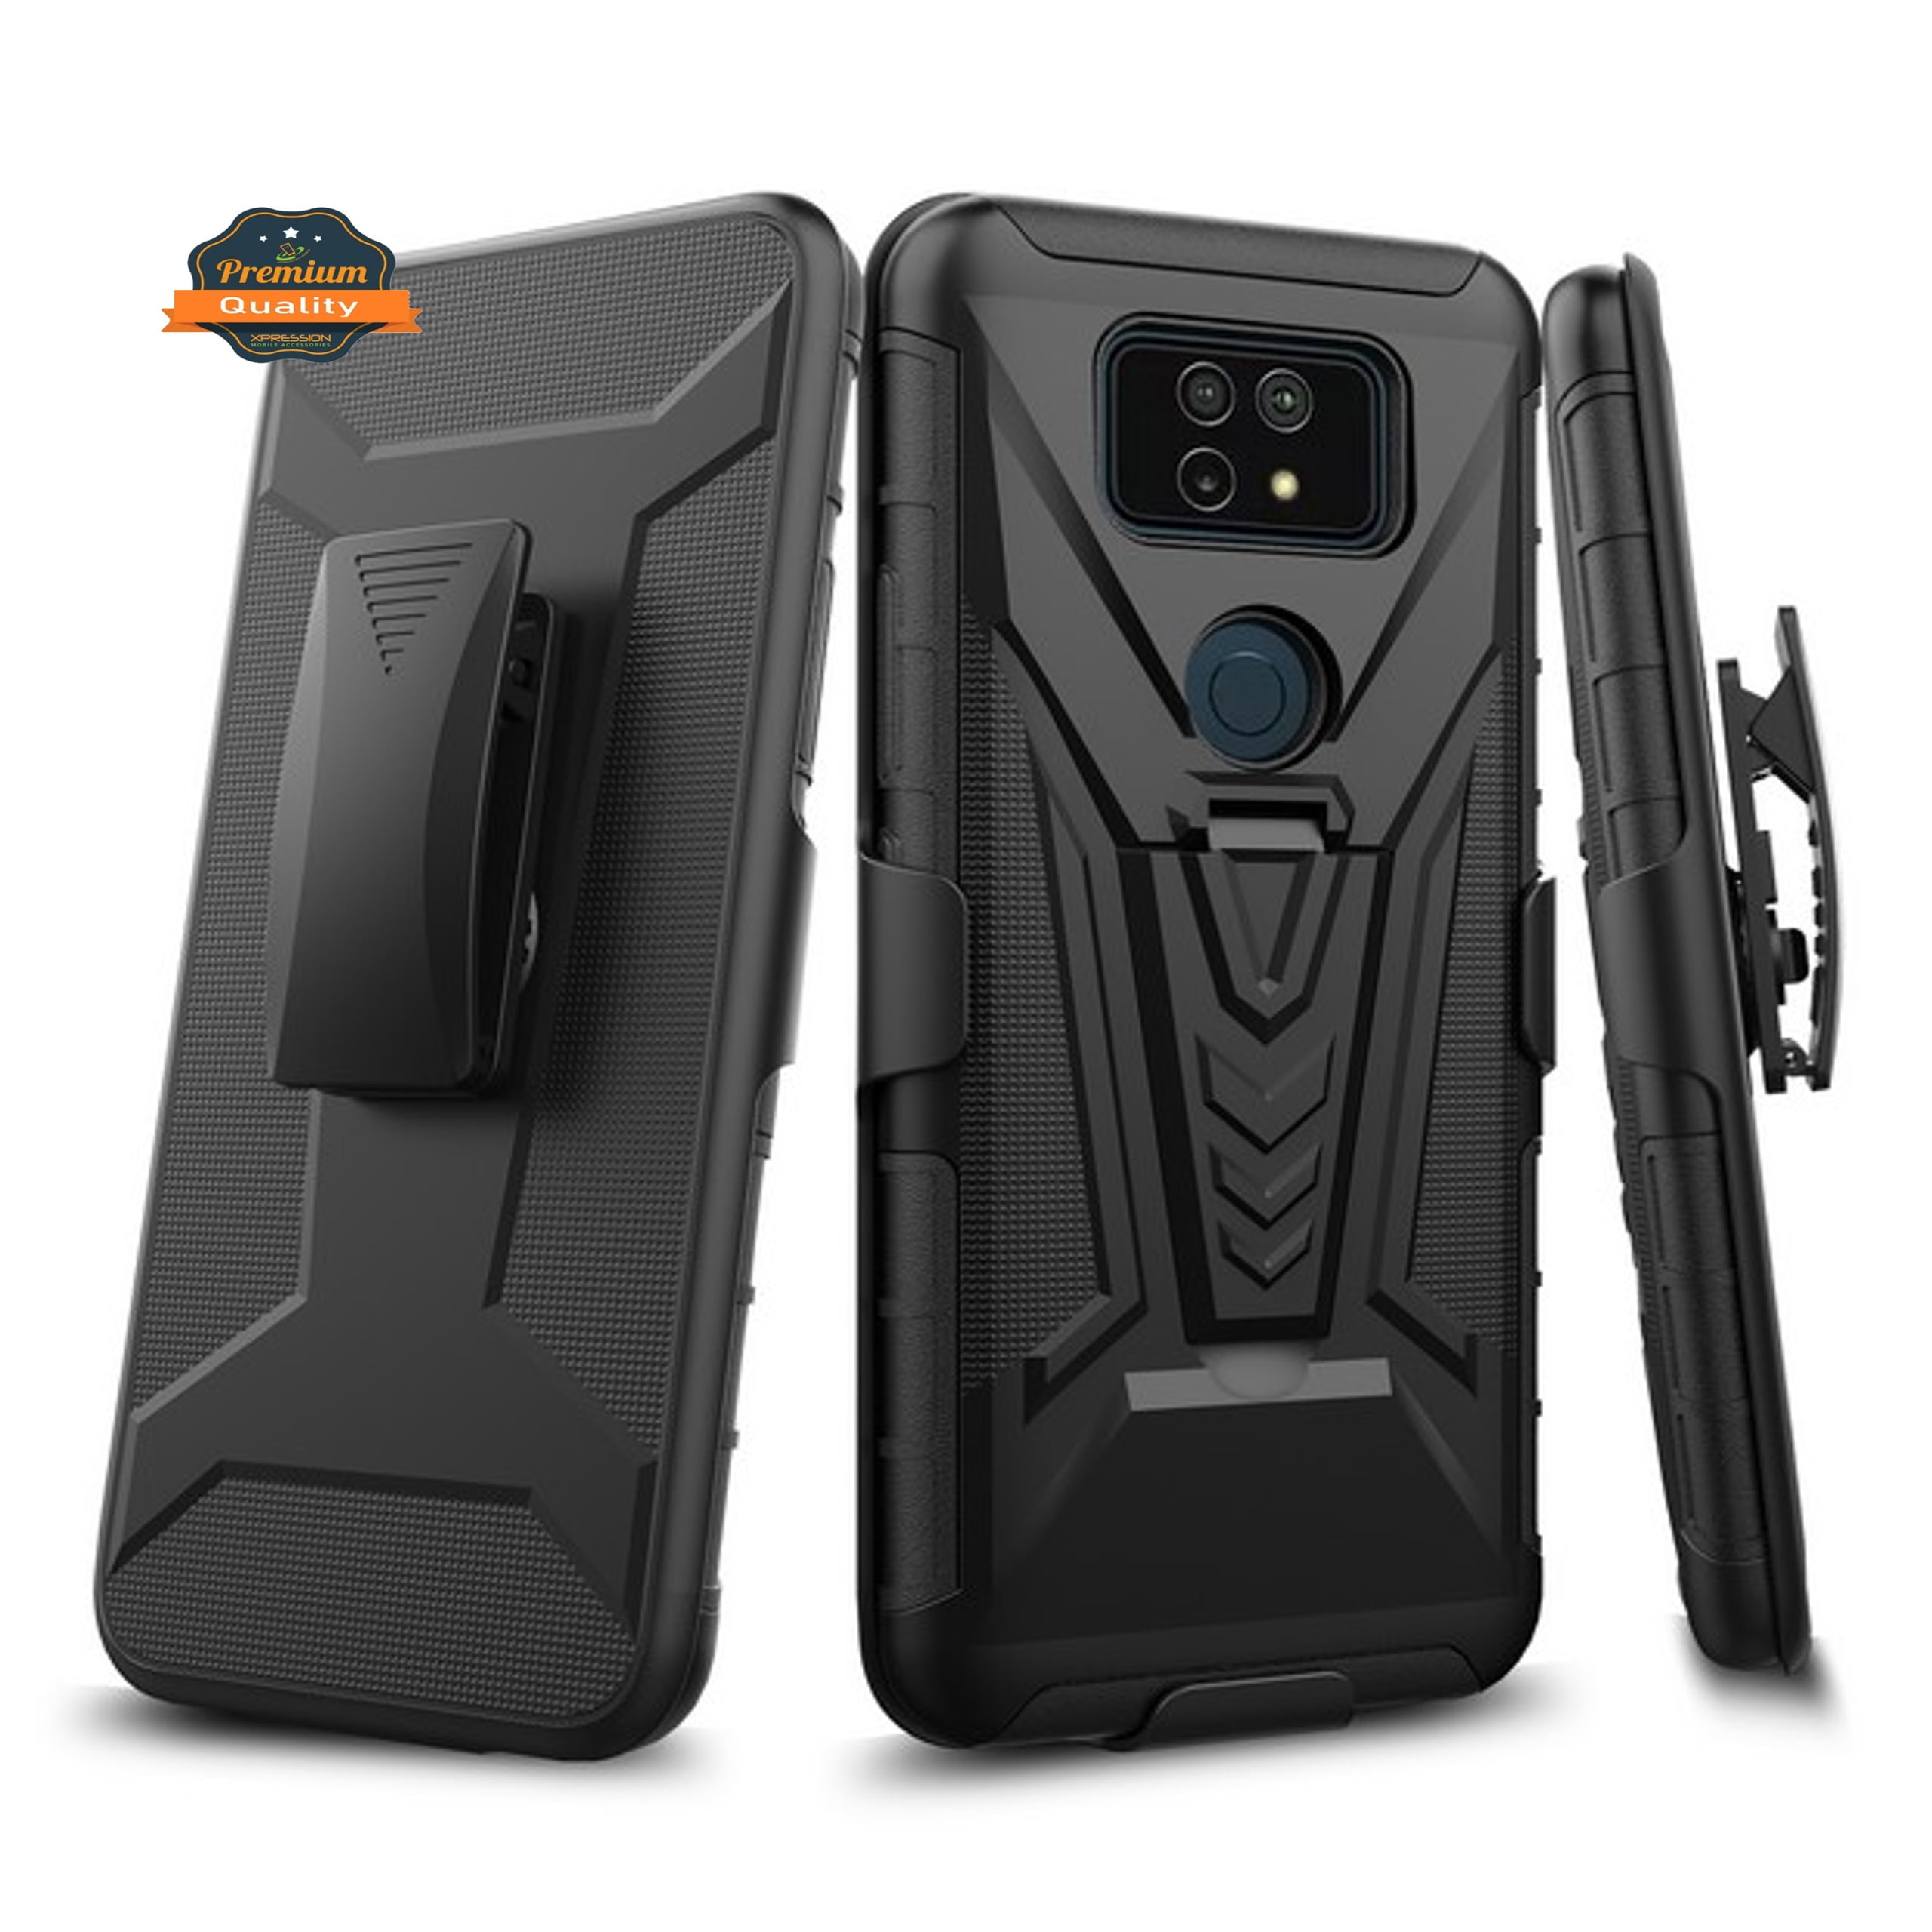 R.Red Premium Belt Clip Holster Kickstand Shockproof Hard Bumper Shell Full Body Dual Layer Rugged Cover for LG G5 Cocomii Robot Armor LG G5 Case NEW Military Defender Heavy Duty